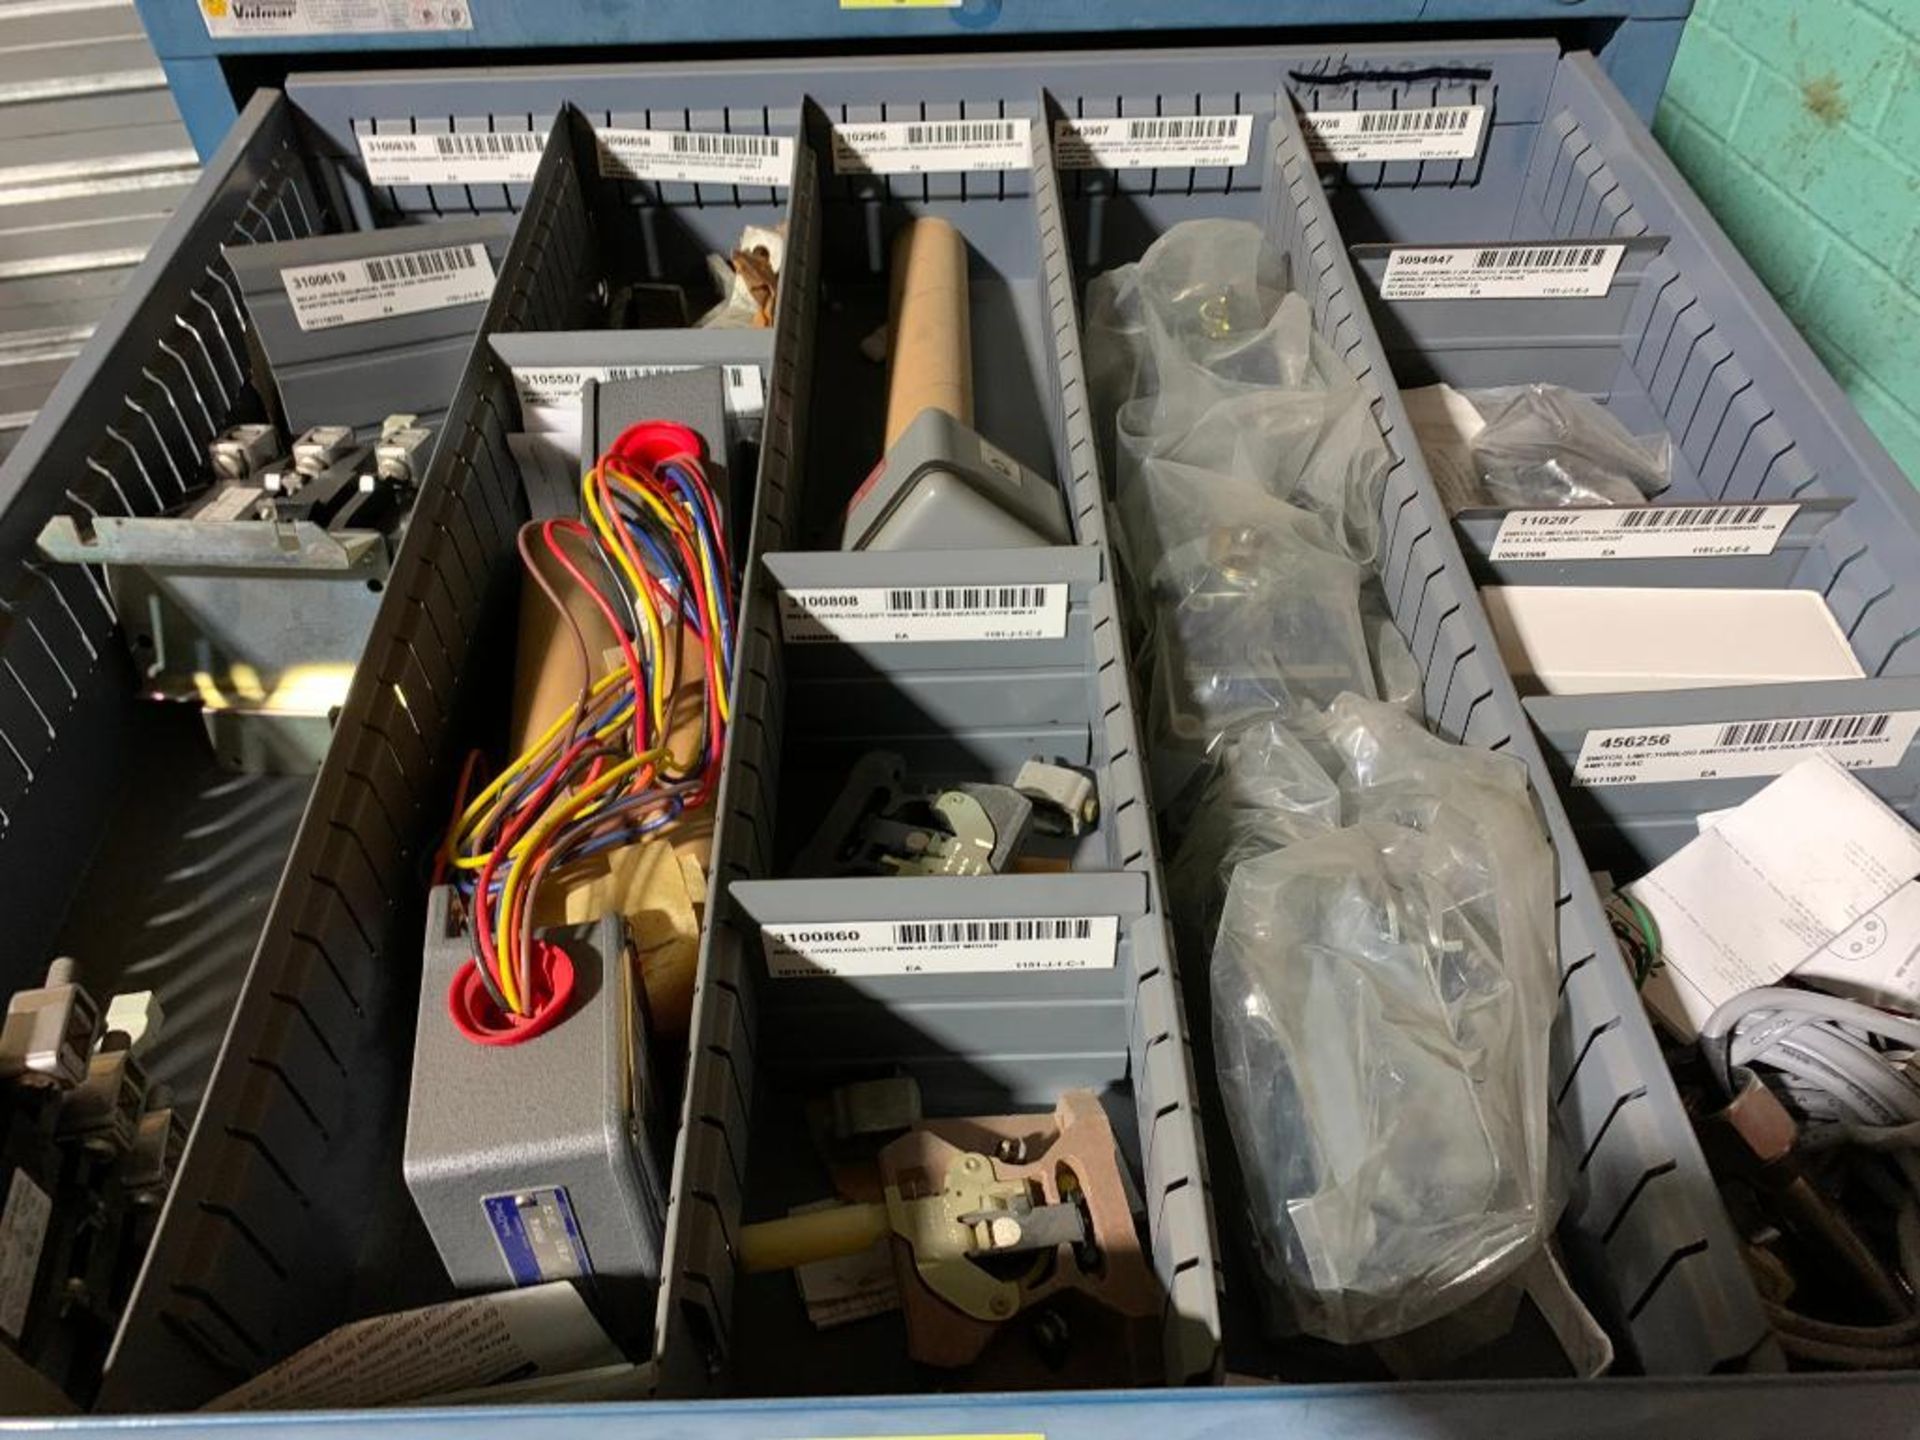 Stanley Vidmar 8-Drawer Cabinet w/ Assorted Switches, Relays, Timers, Electrical Connectors - Image 2 of 9